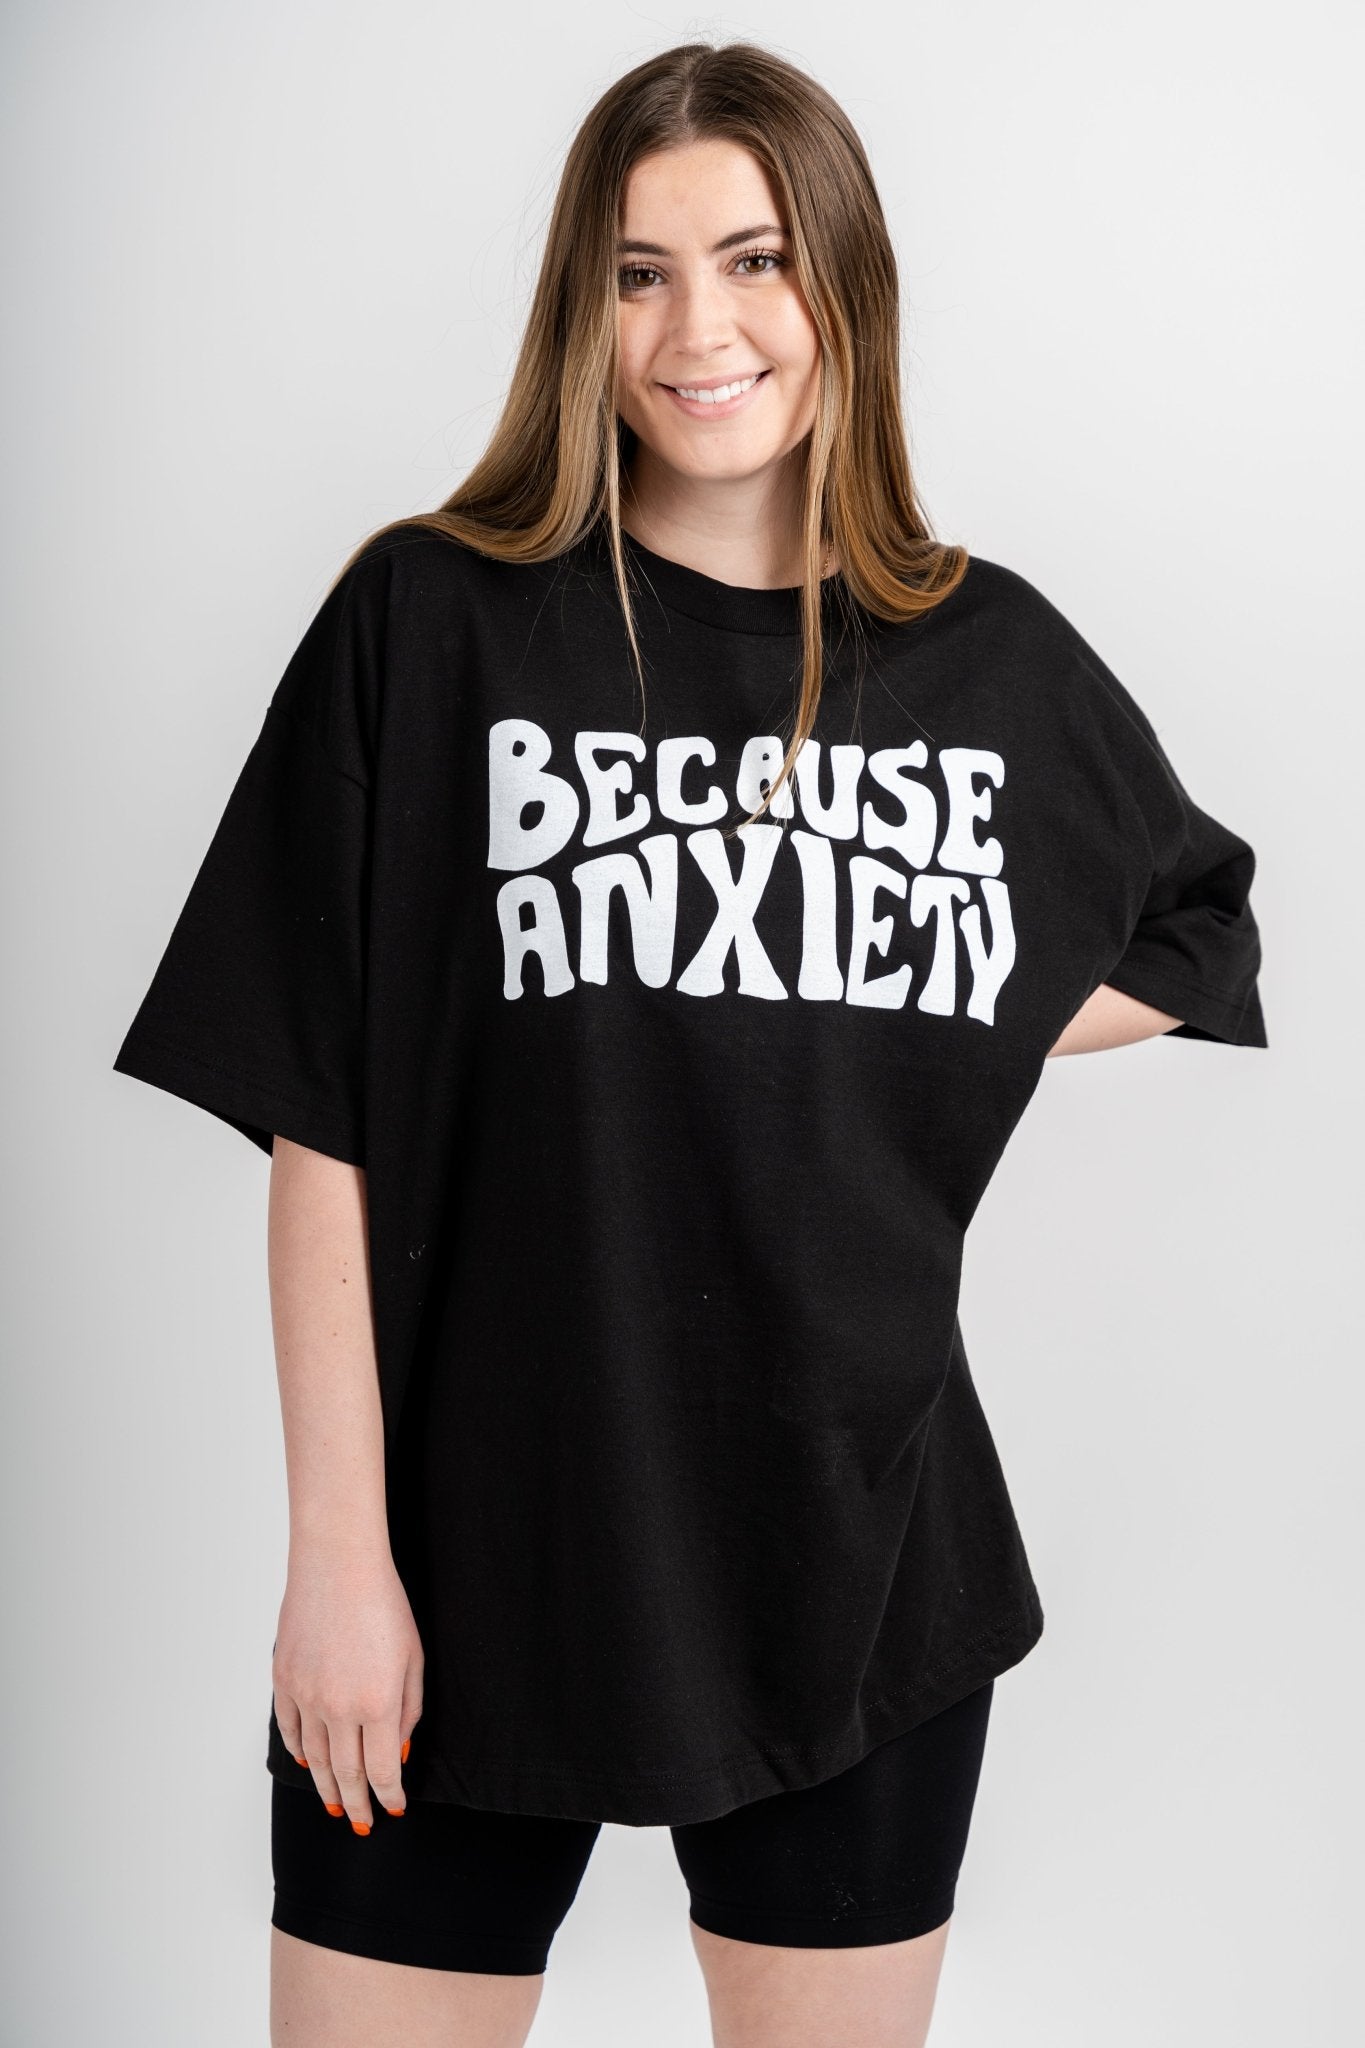 Because anxiety oversized t-shirt black - Stylish T-shirts - Trendy Graphic T-Shirts and Tank Tops at Lush Fashion Lounge Boutique in Oklahoma City